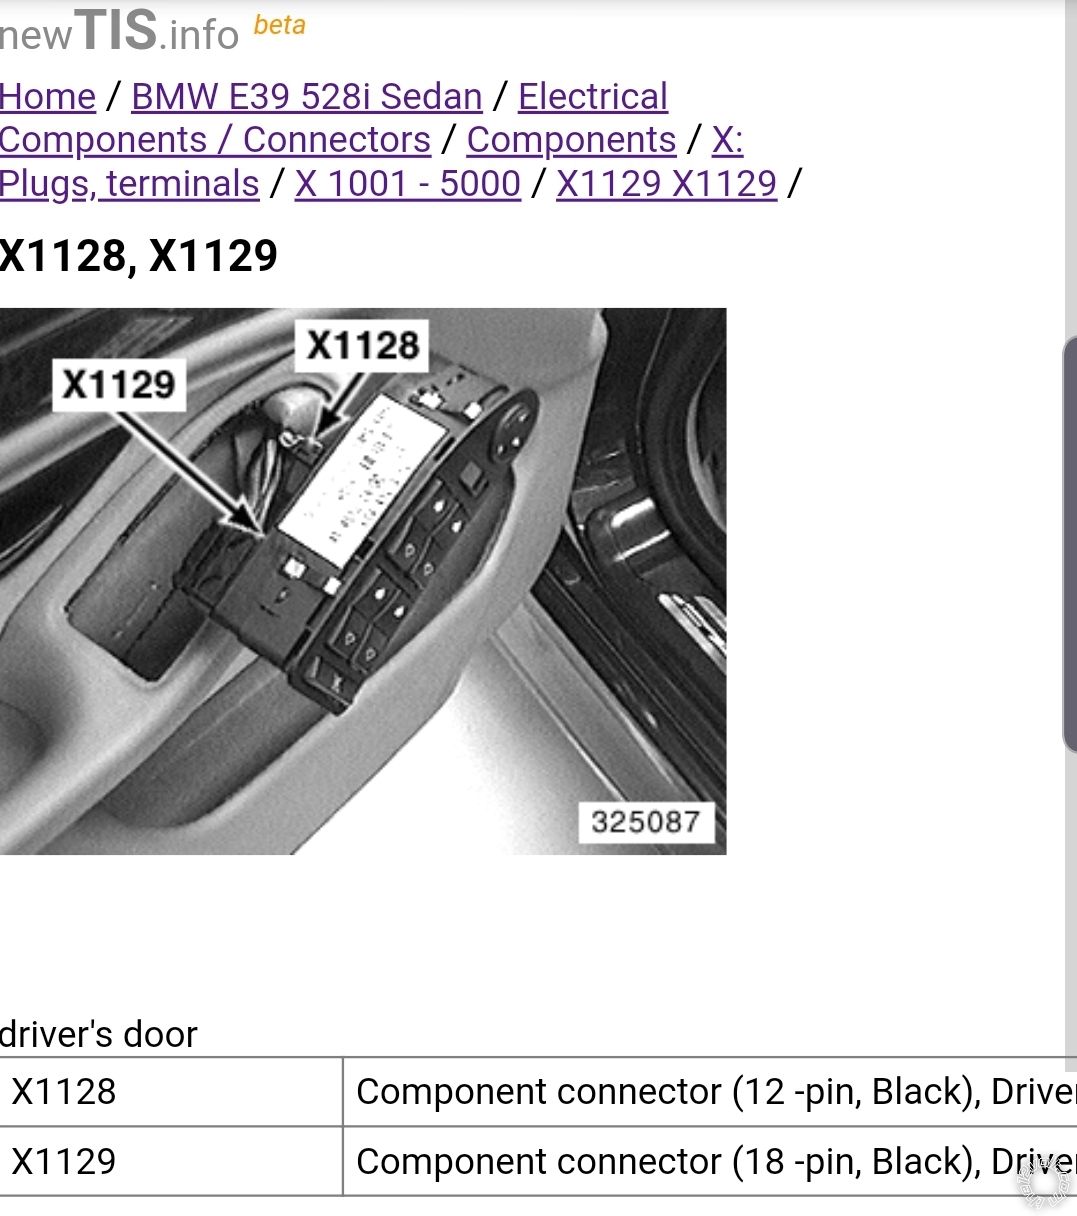 Pictorial Remote Starter 1998 BMW 528i E39 -- posted image.